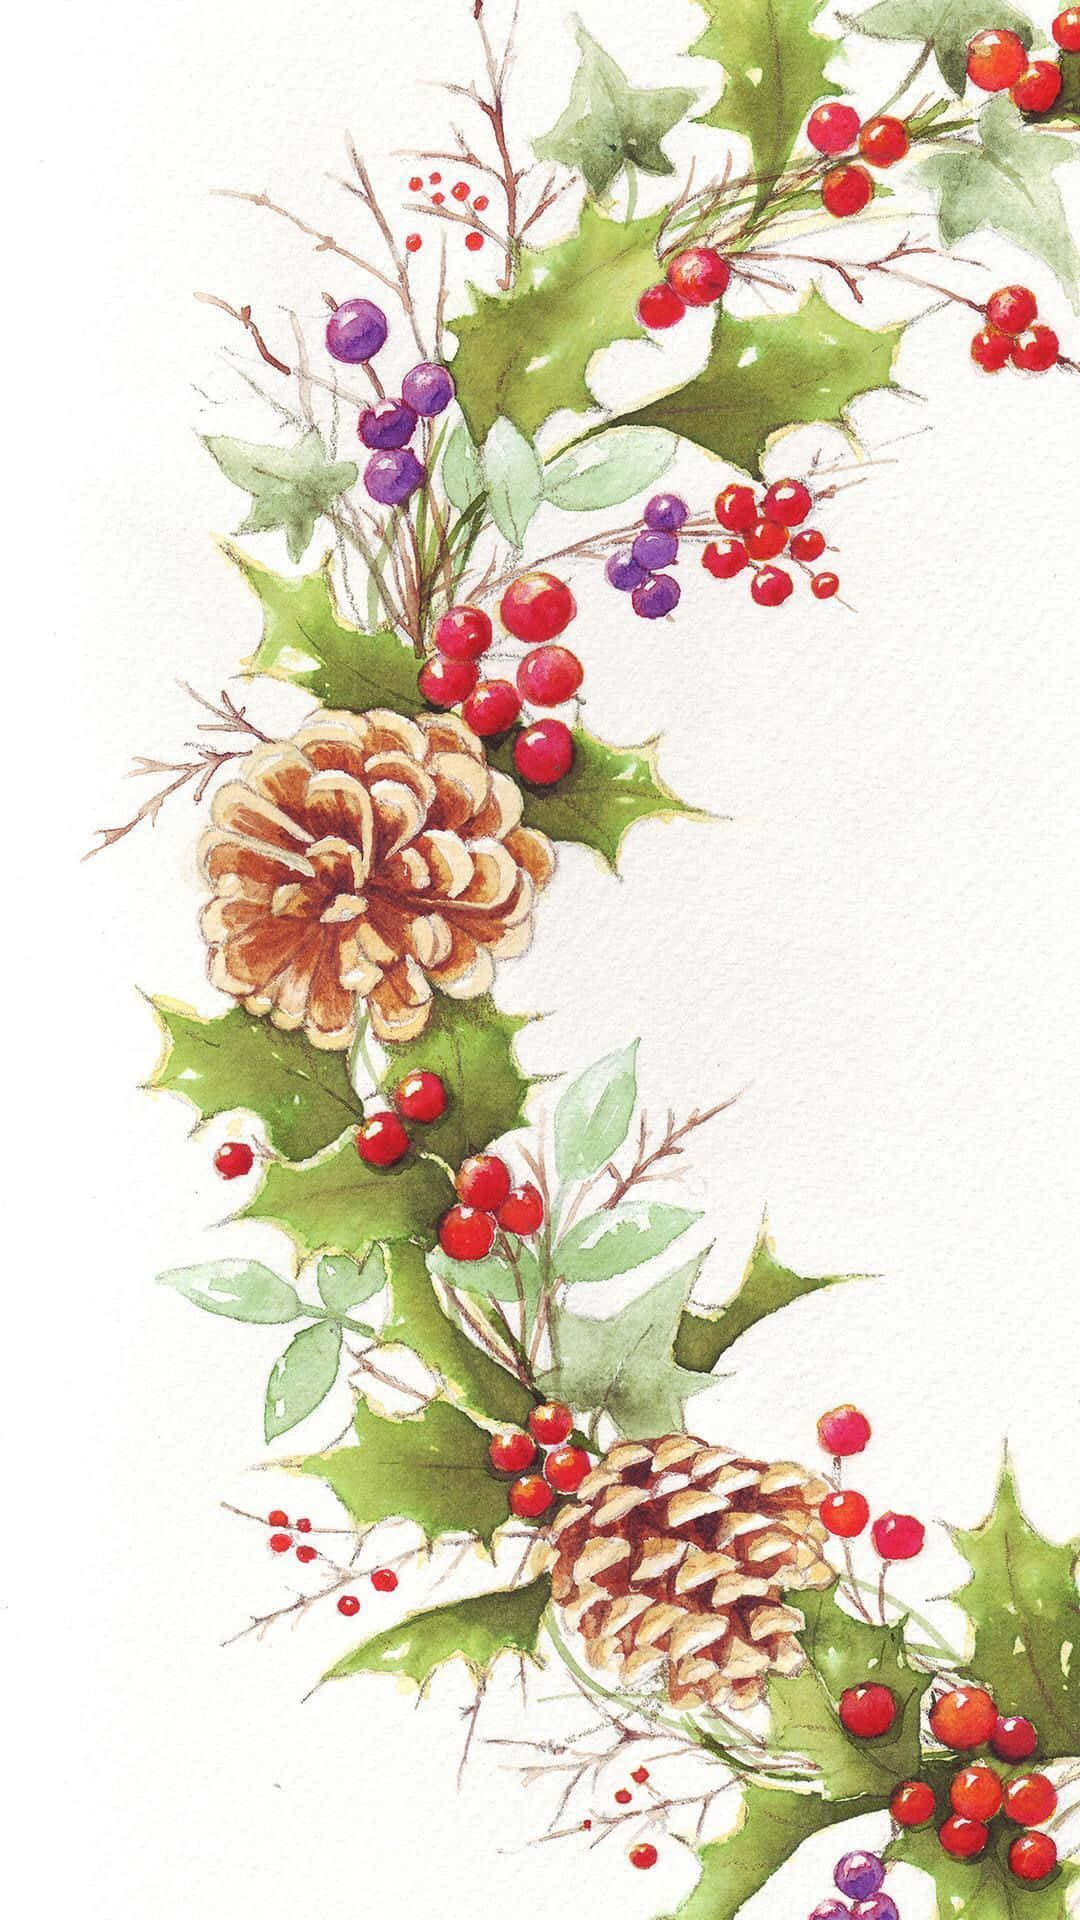 Have a Ho Ho Holiday with our quirky, girly xmas picks! Wallpaper